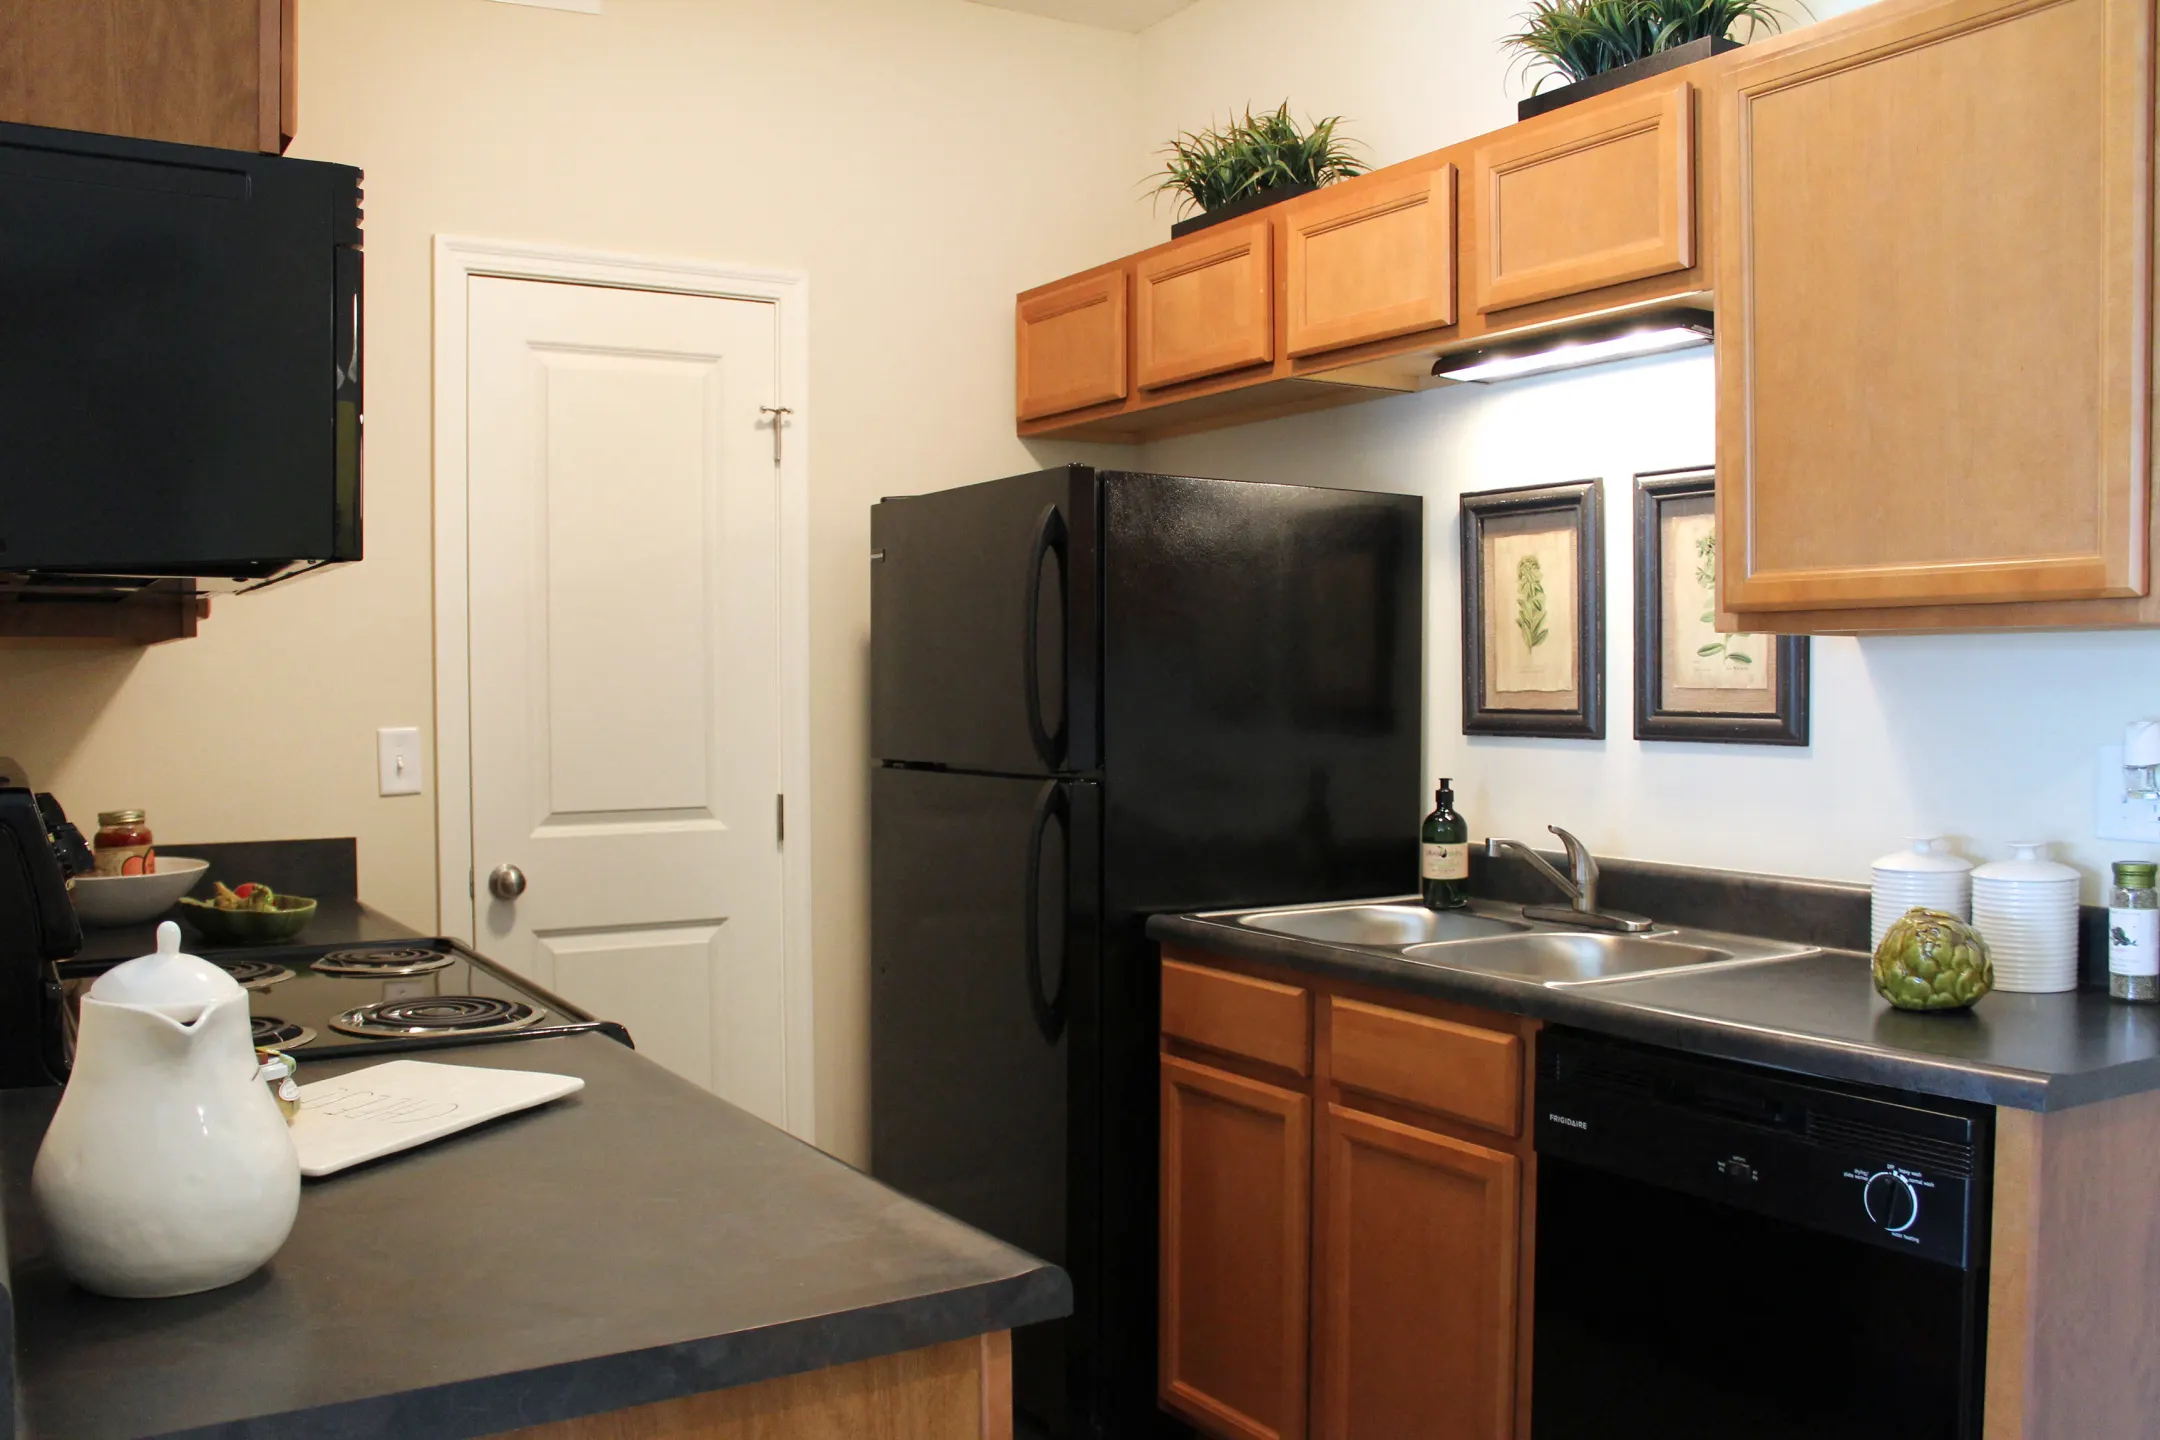 Kitchen - Residences at Northgate Crossing - Columbus, OH